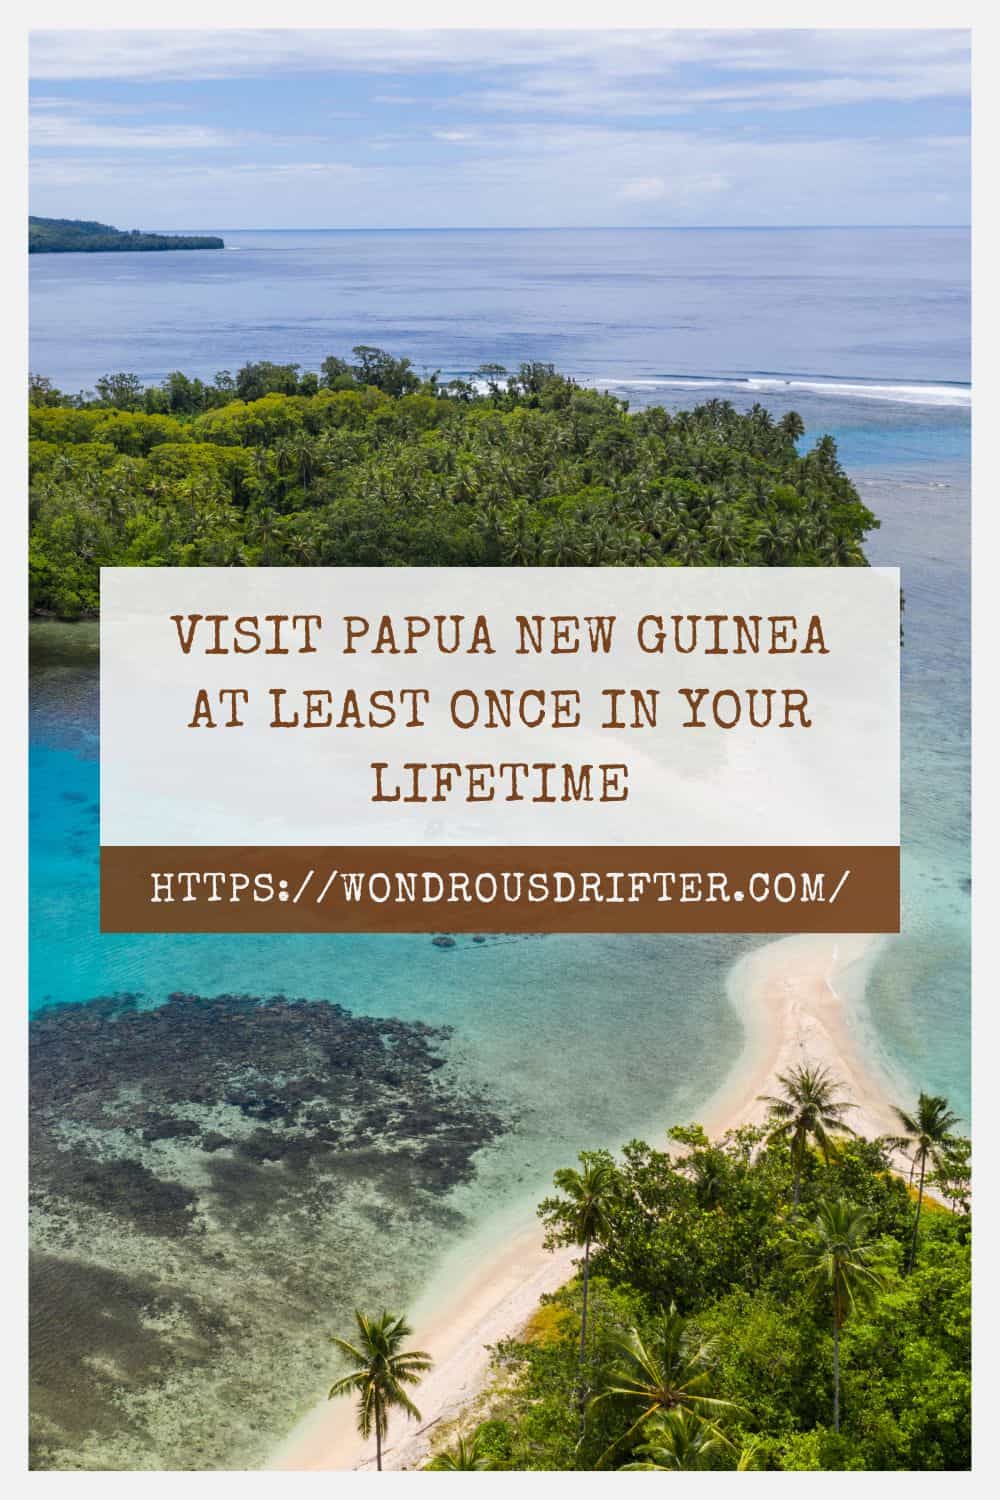 Visit Papua New Guinea at least once in your lifetime